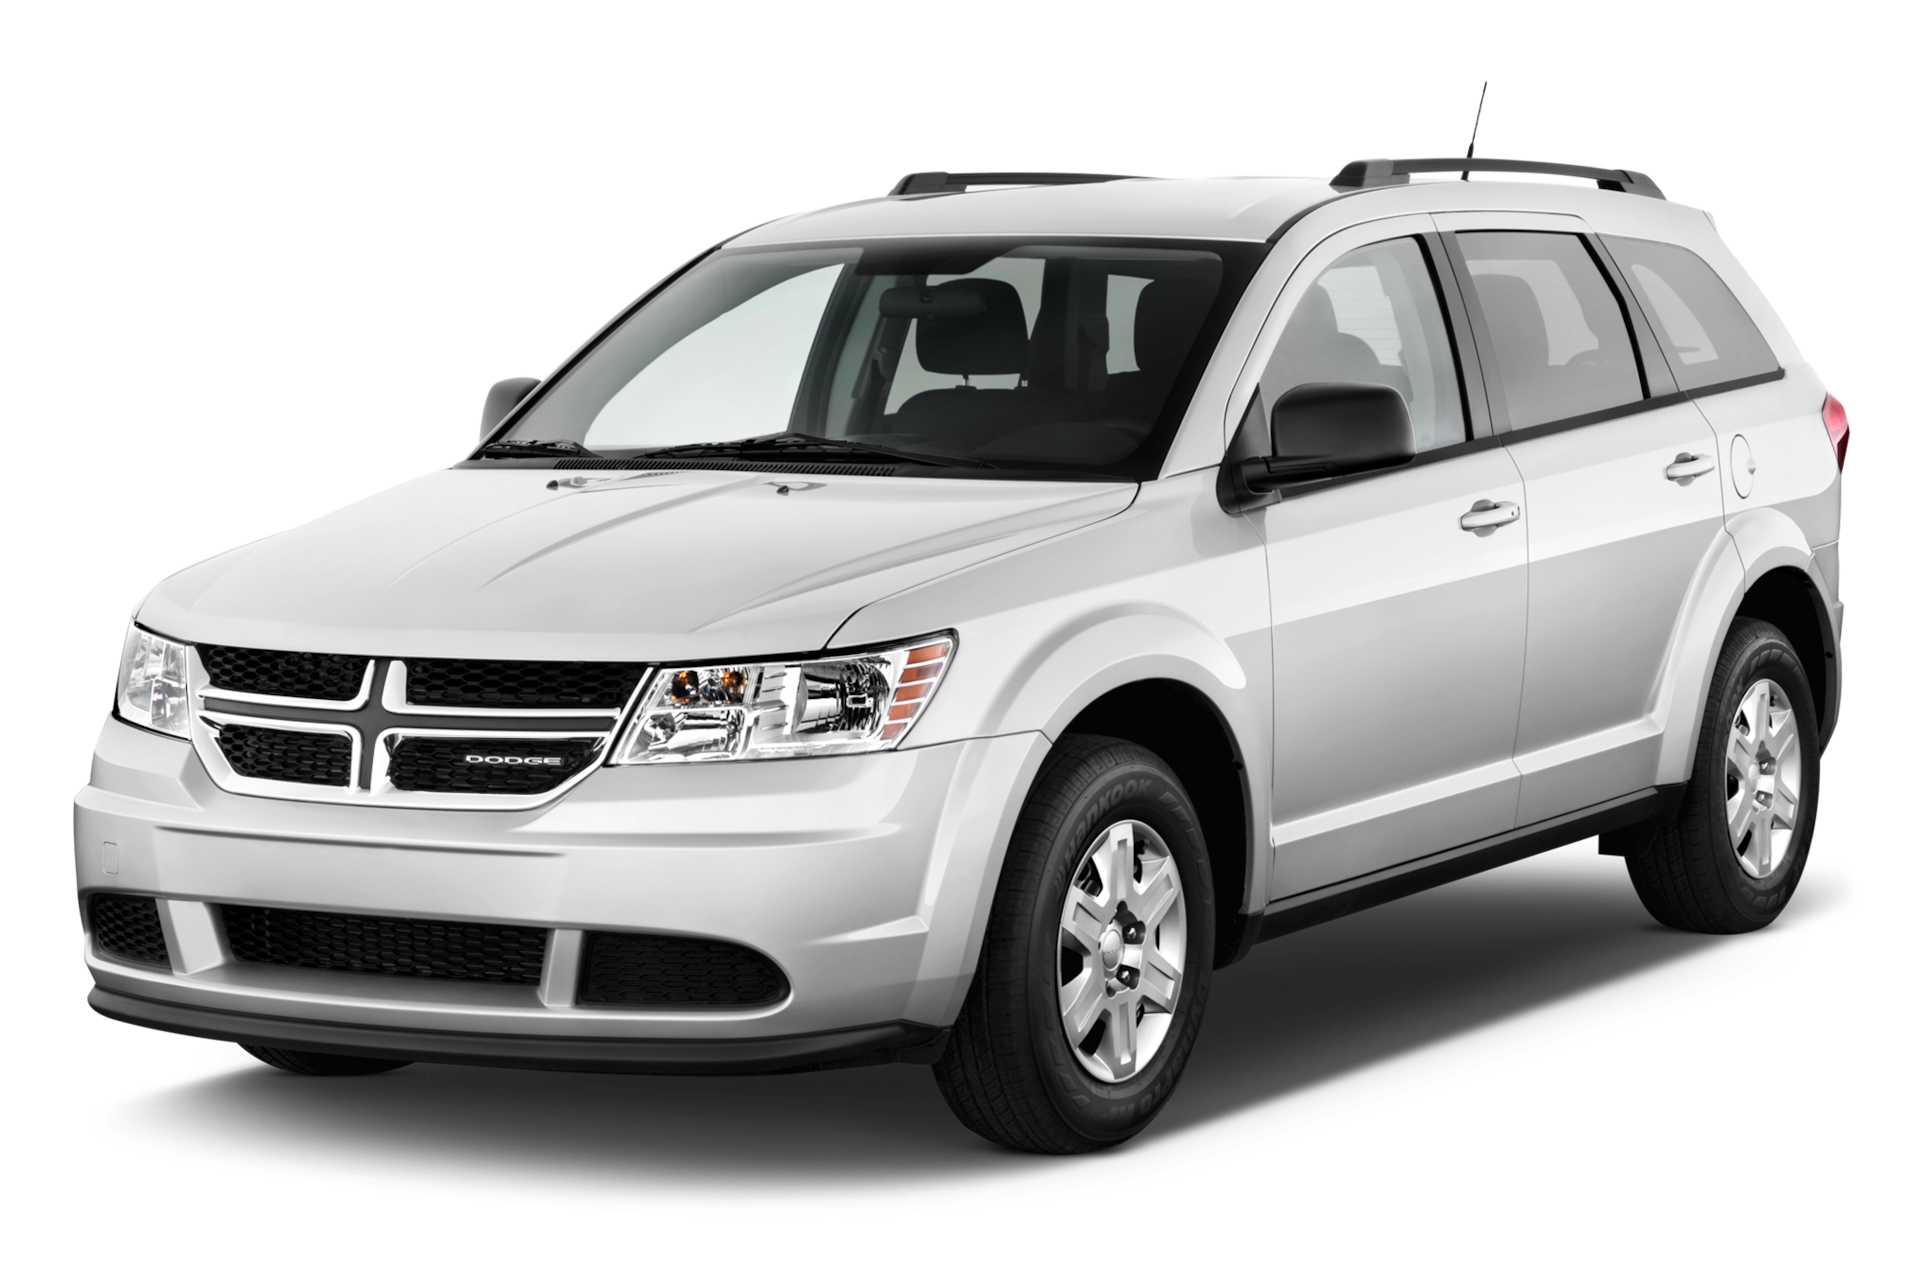 2012 Dodge Journey Prices, Reviews, and Photos - MotorTrend